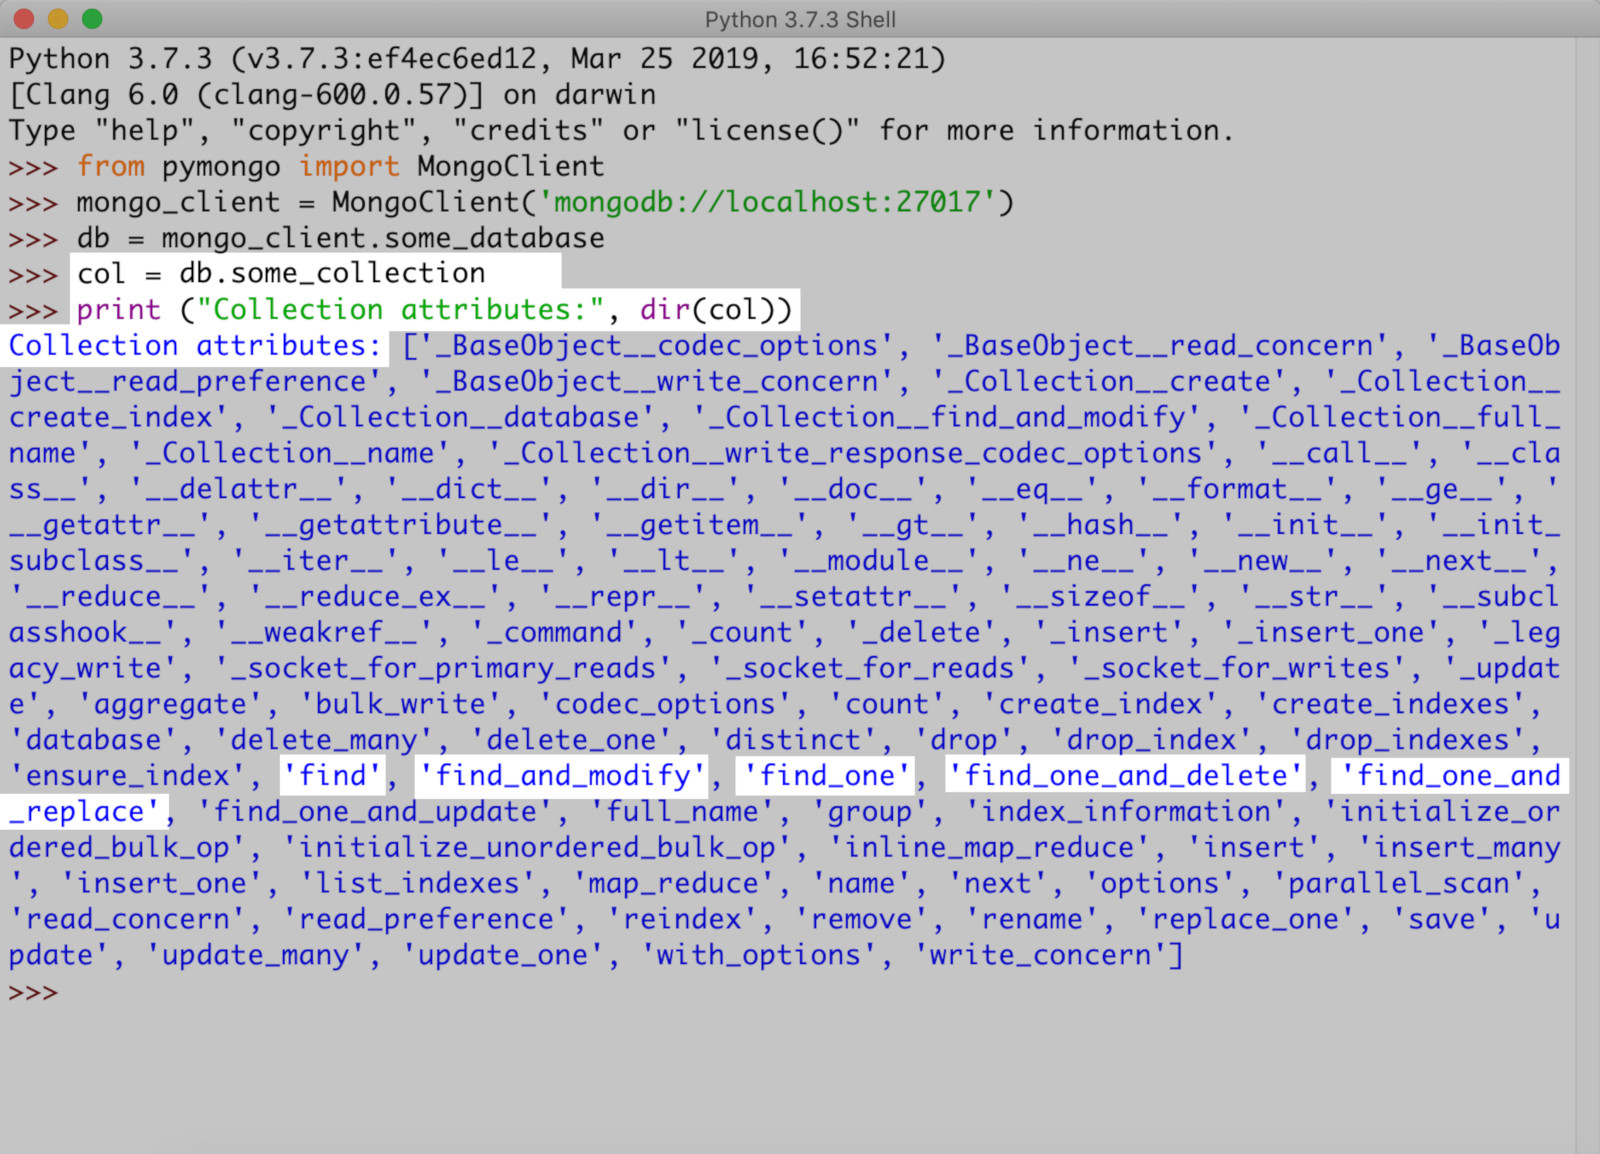 Screenshot of Python's IDLE returning all of a MongoDB collection attributes